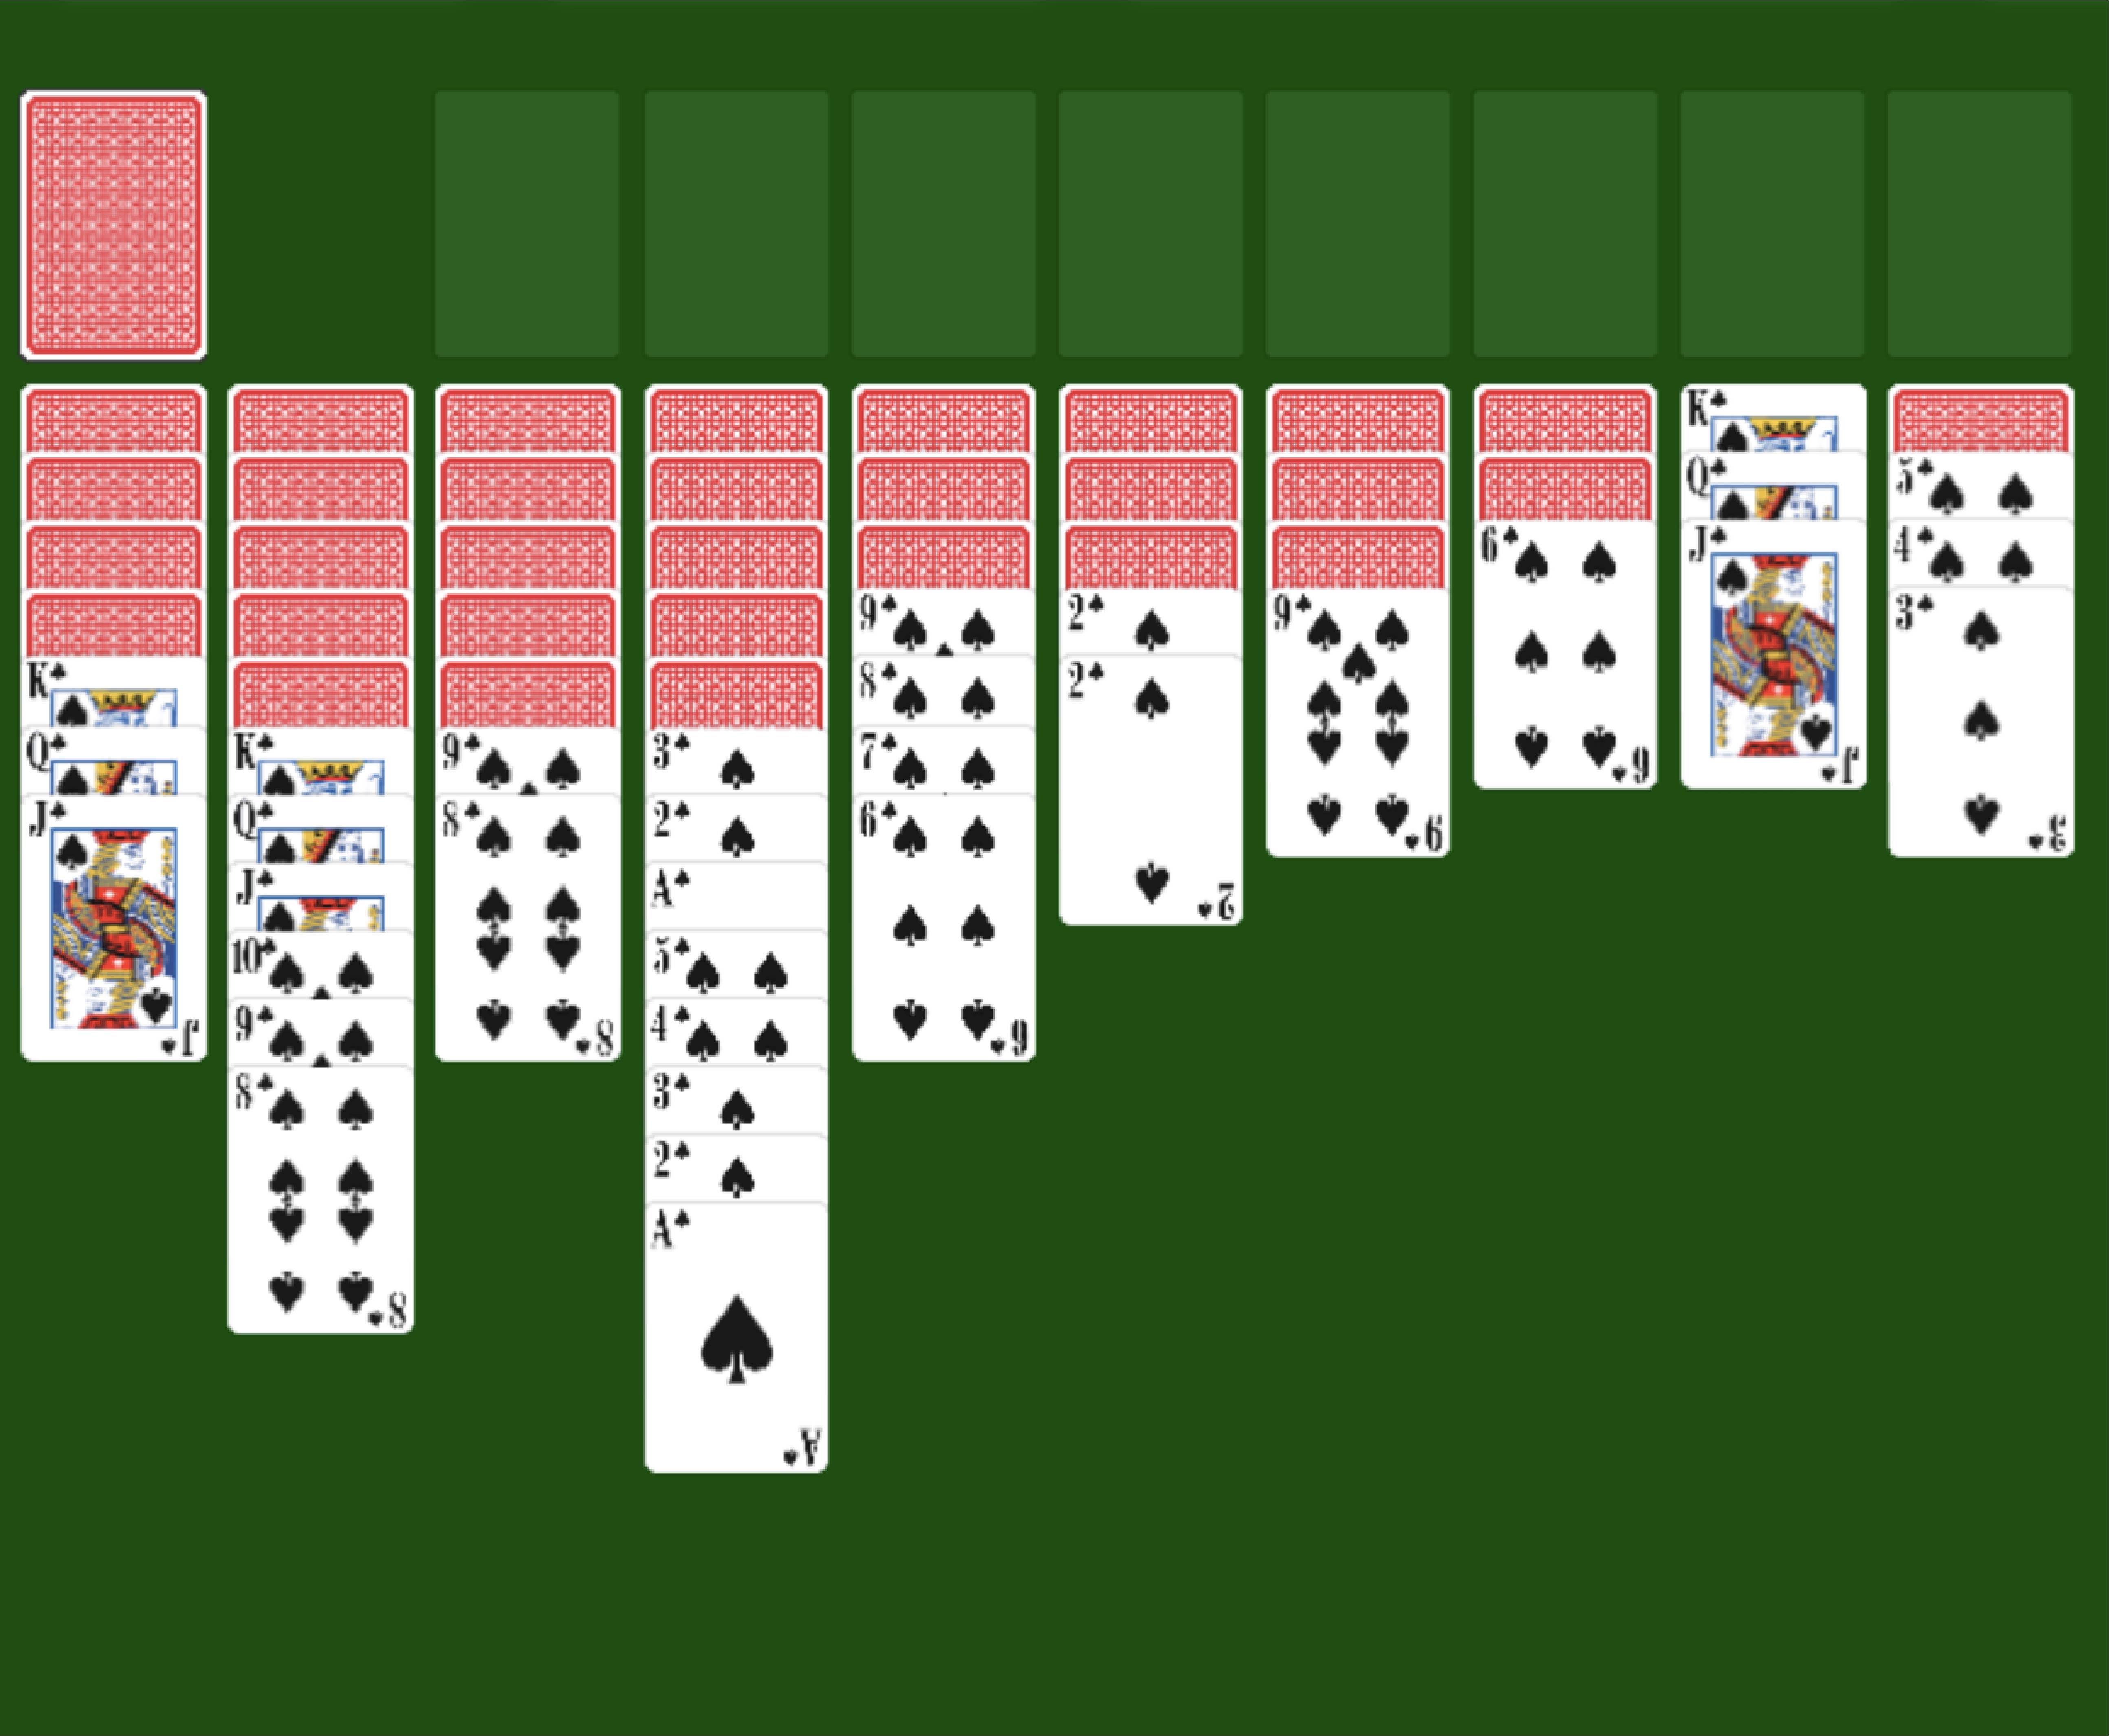 spider solitaire 2 suits free